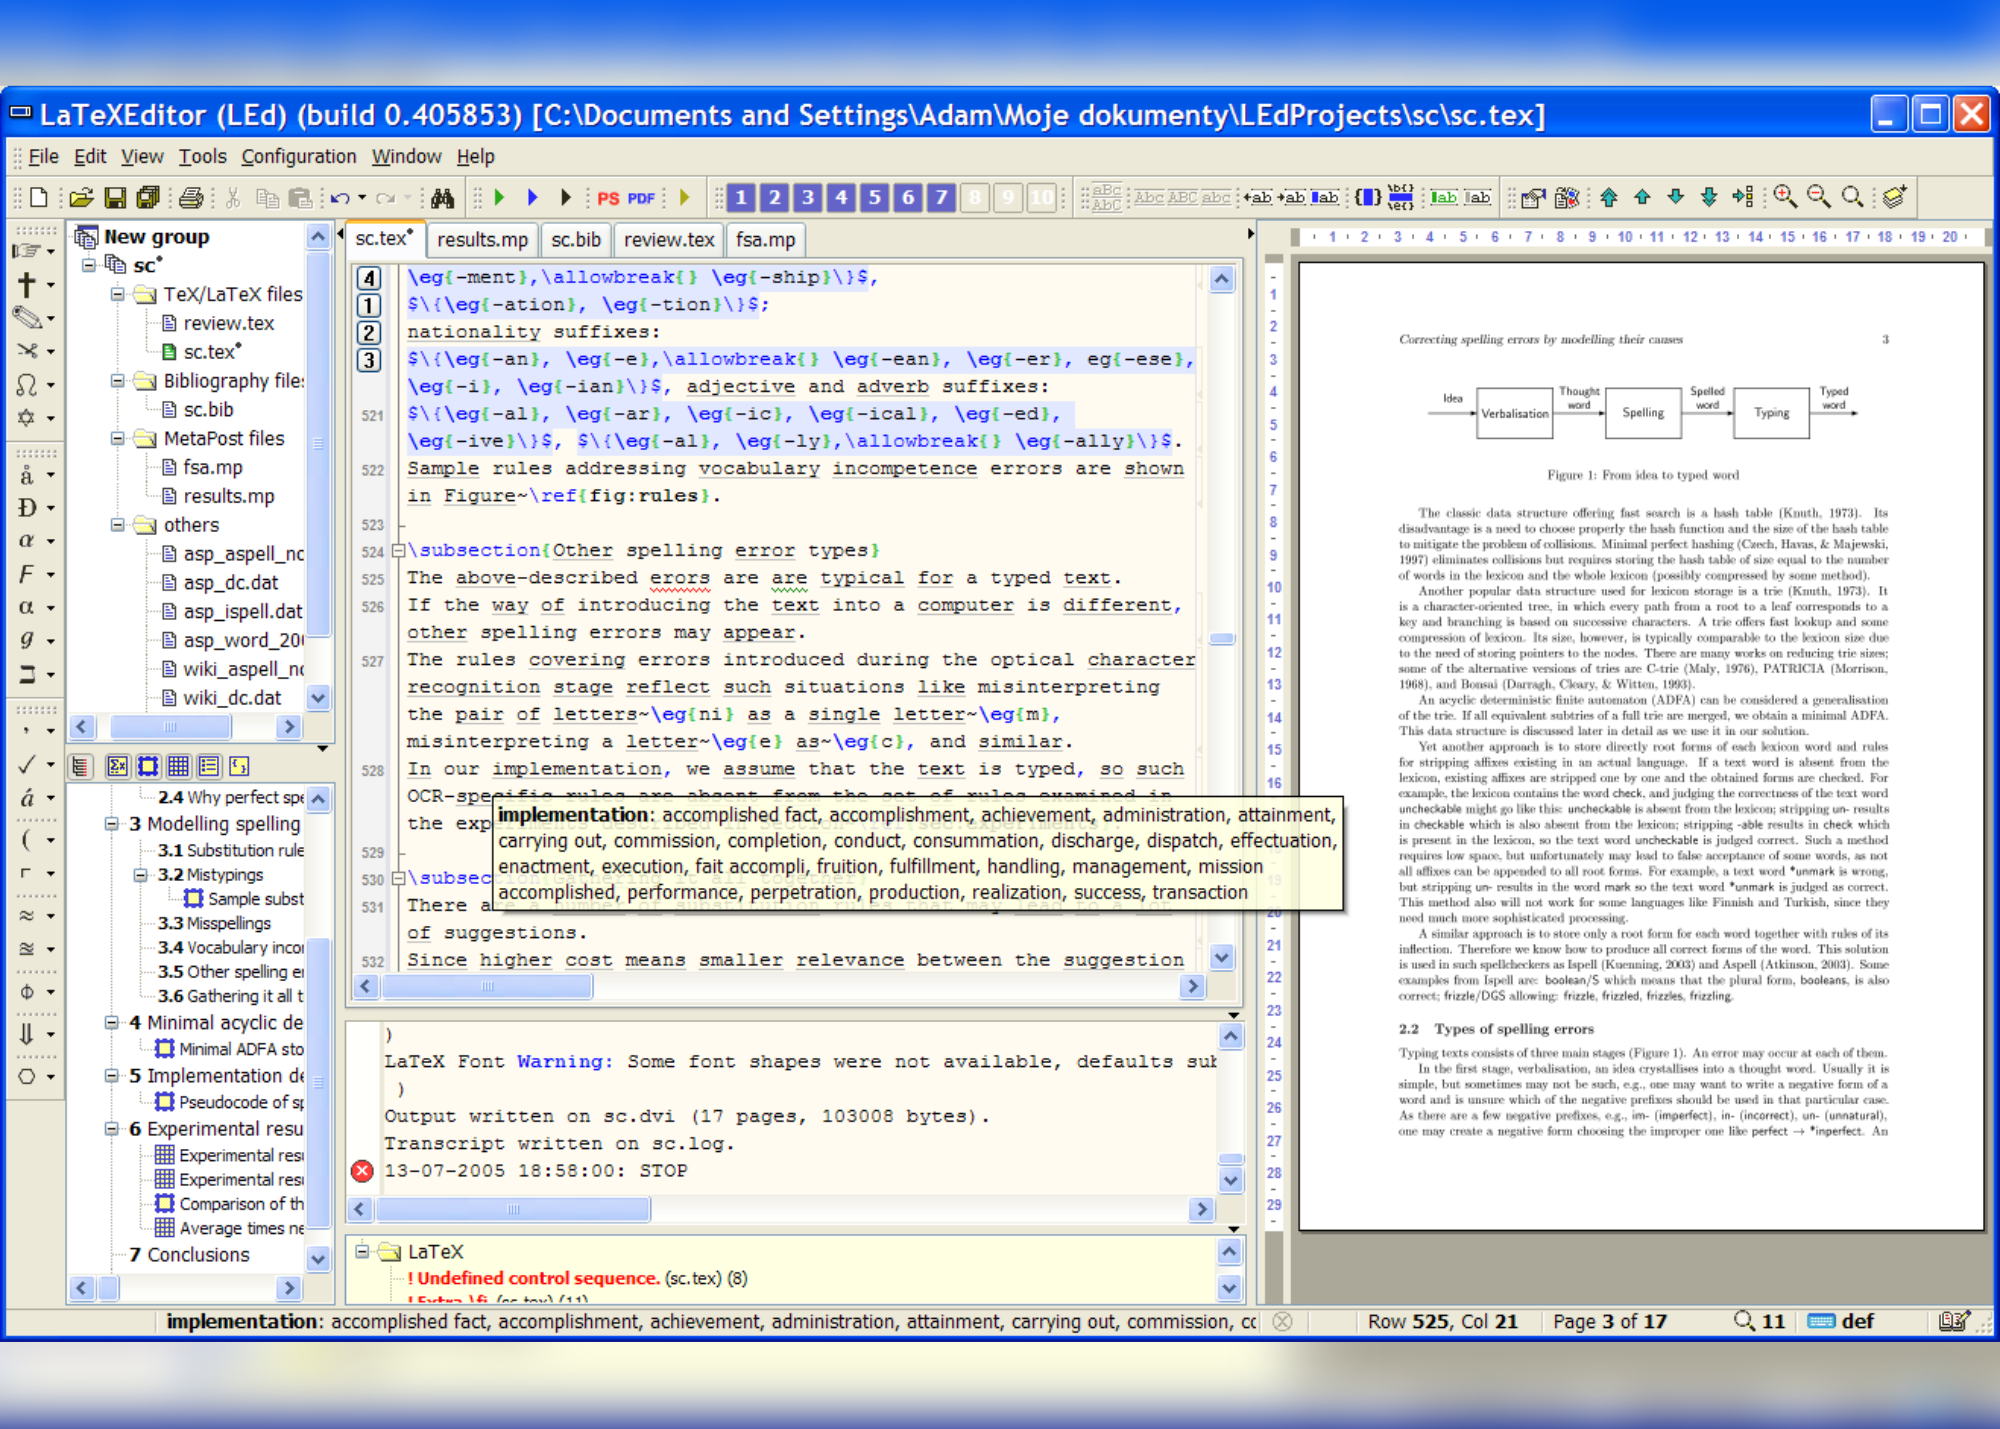 A screenshot from the LaTex editor displaying a thesaurus feature and a box containing synonyms for "implementation."